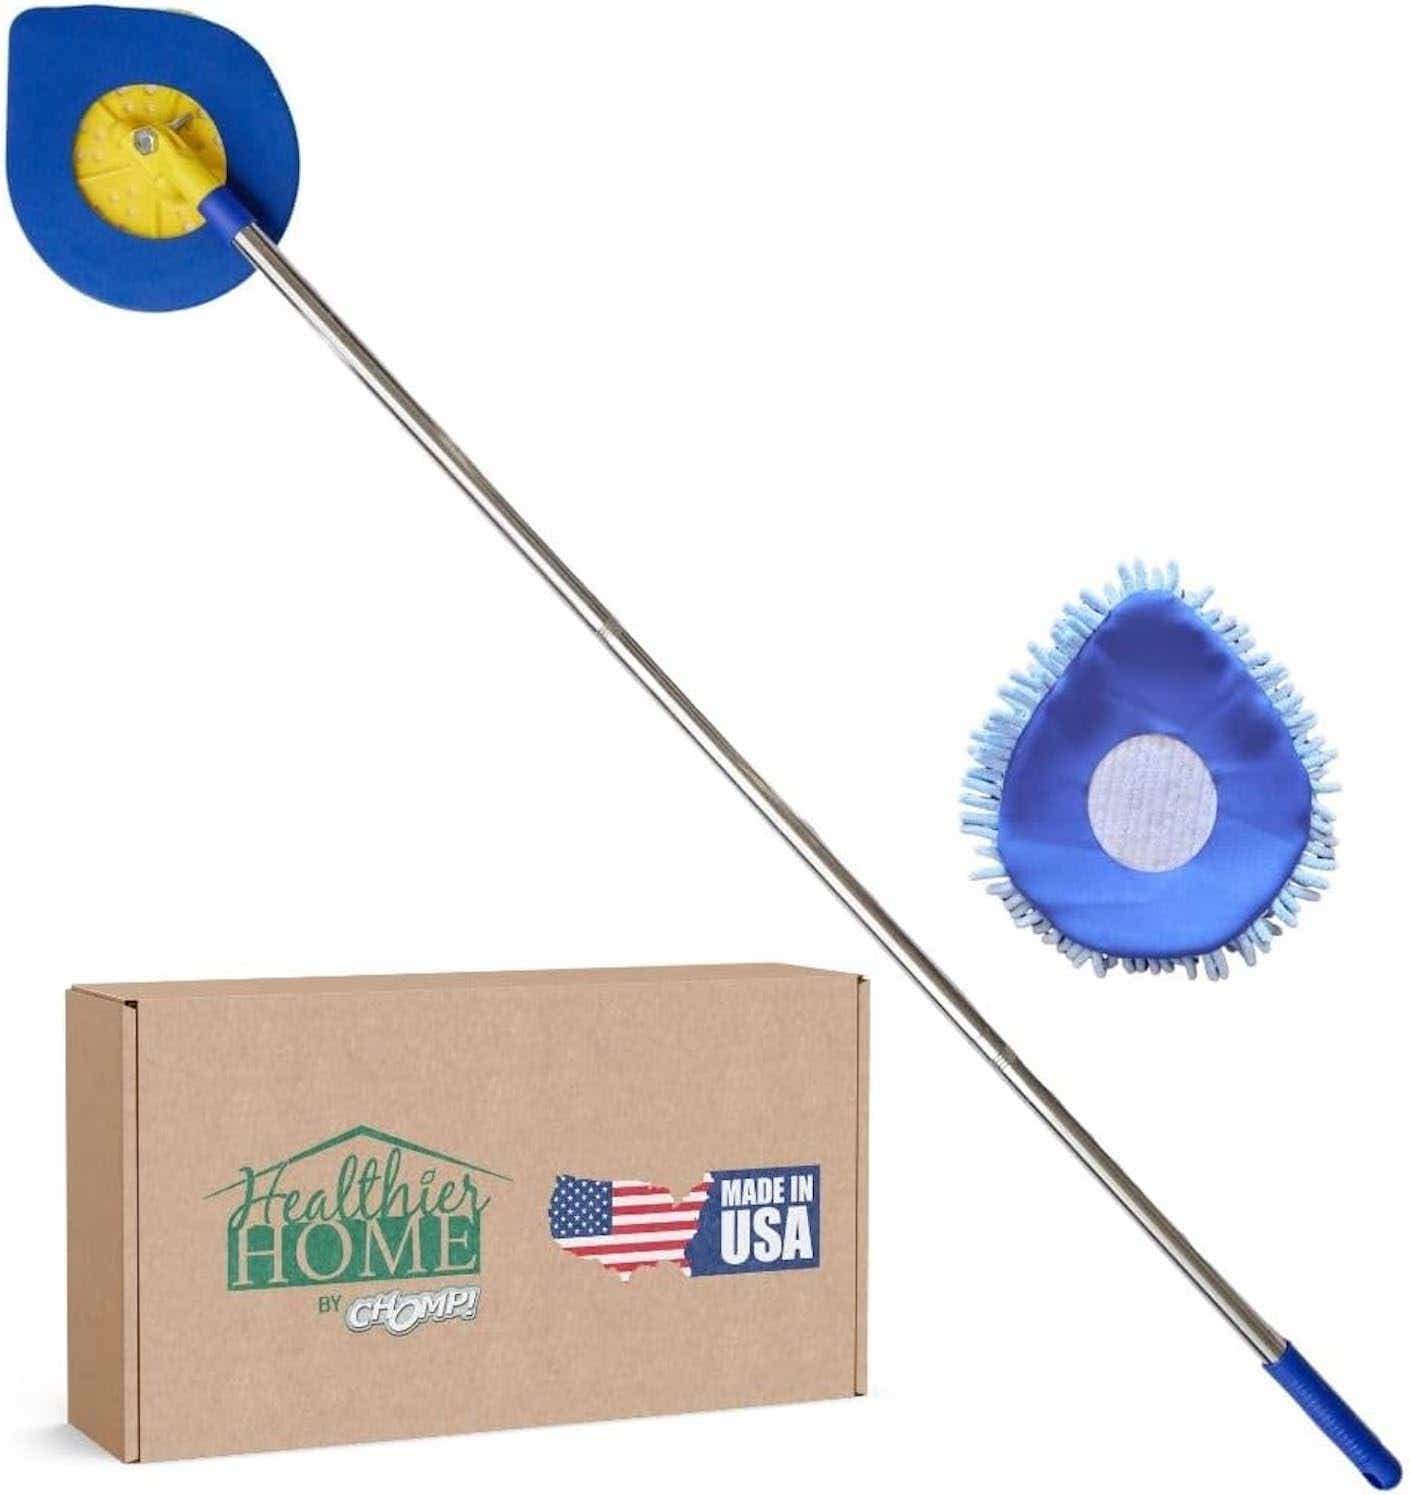 A long handled mop designed to clean walls.